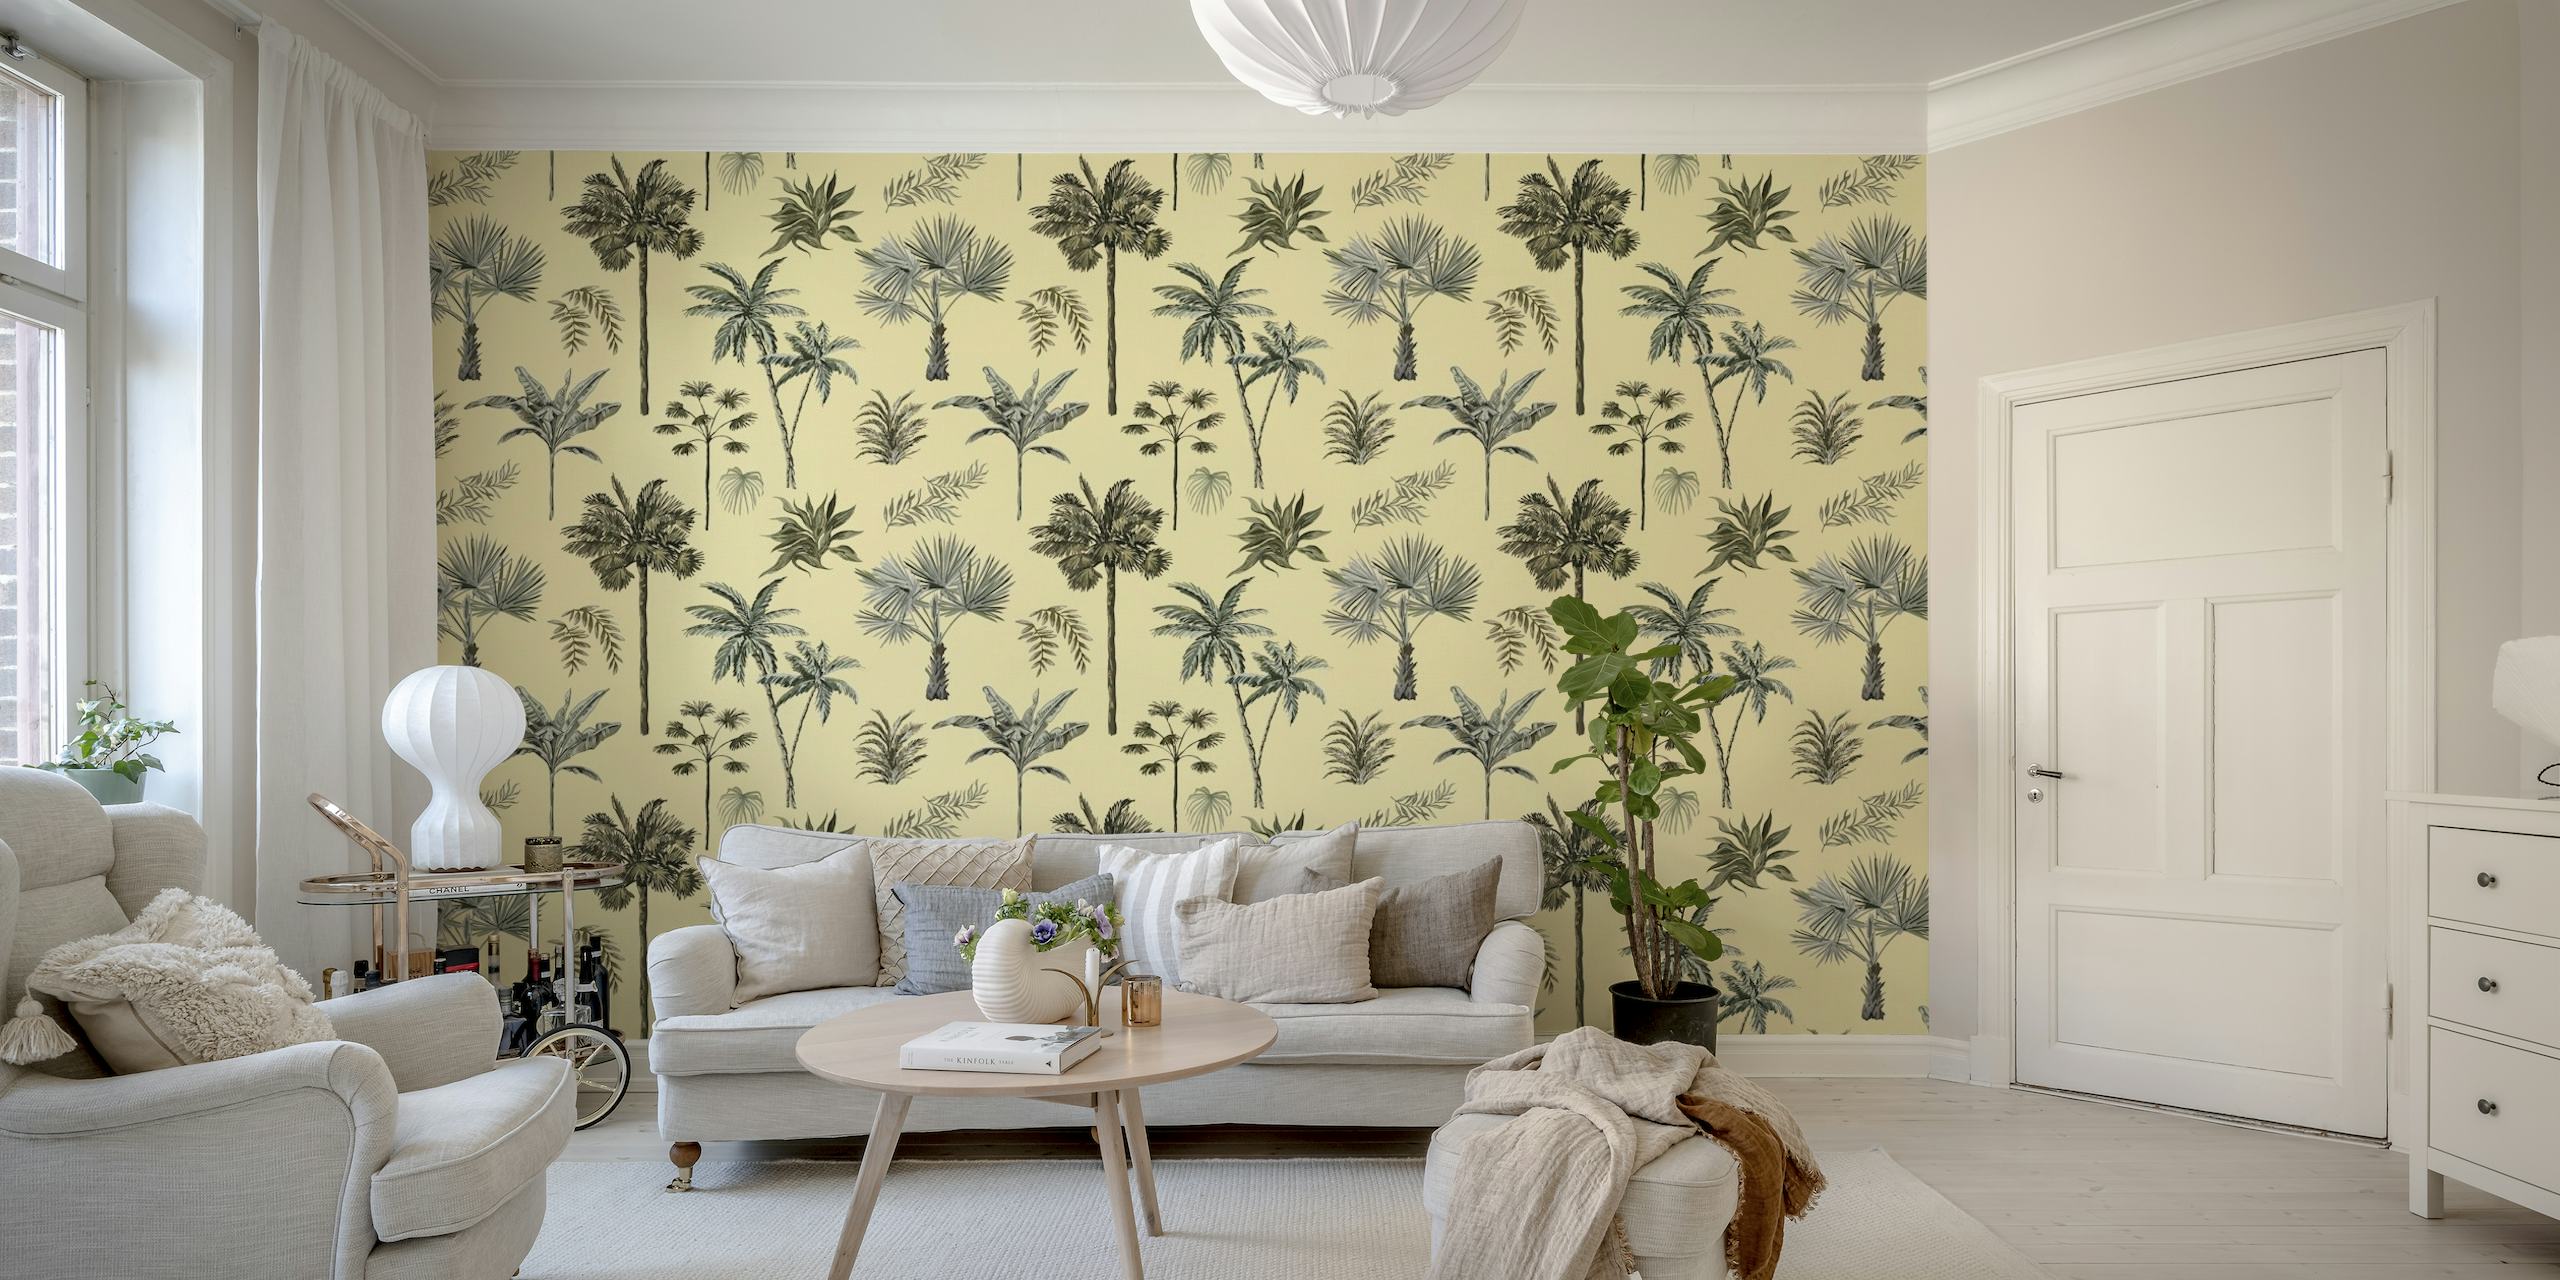 Yellow tree pattern wall mural with blue accents for interior decor.